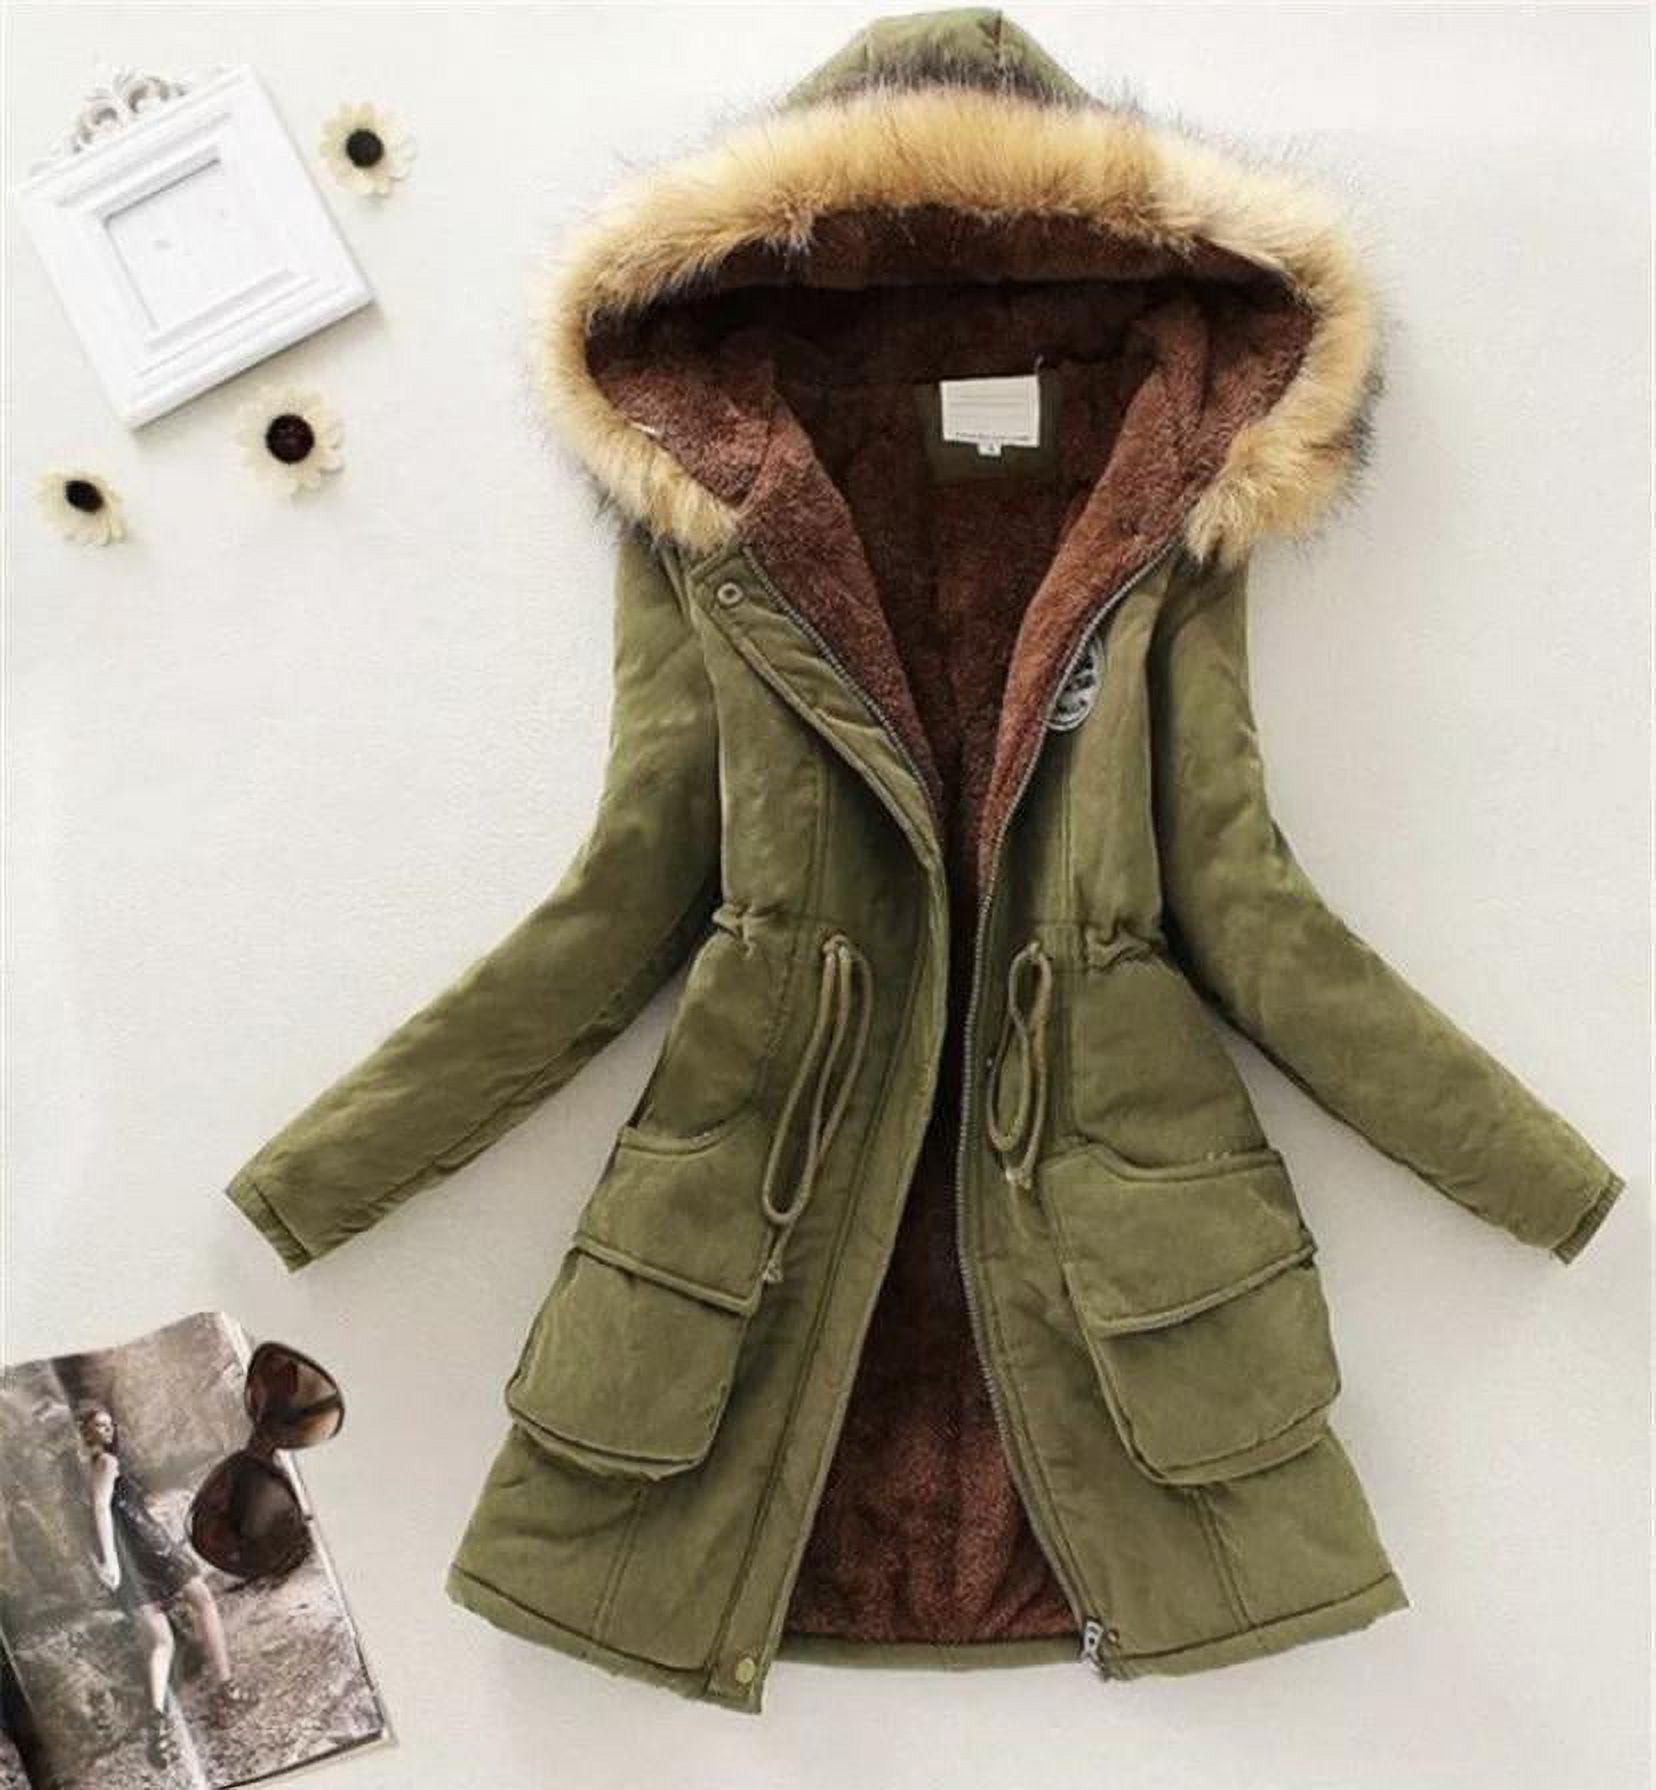 Womens Warm Long Coat Fur Collar Hooded Jacket Slim Winter Parka Outwear Coats with pockets light weight comfortable warm - image 1 of 7